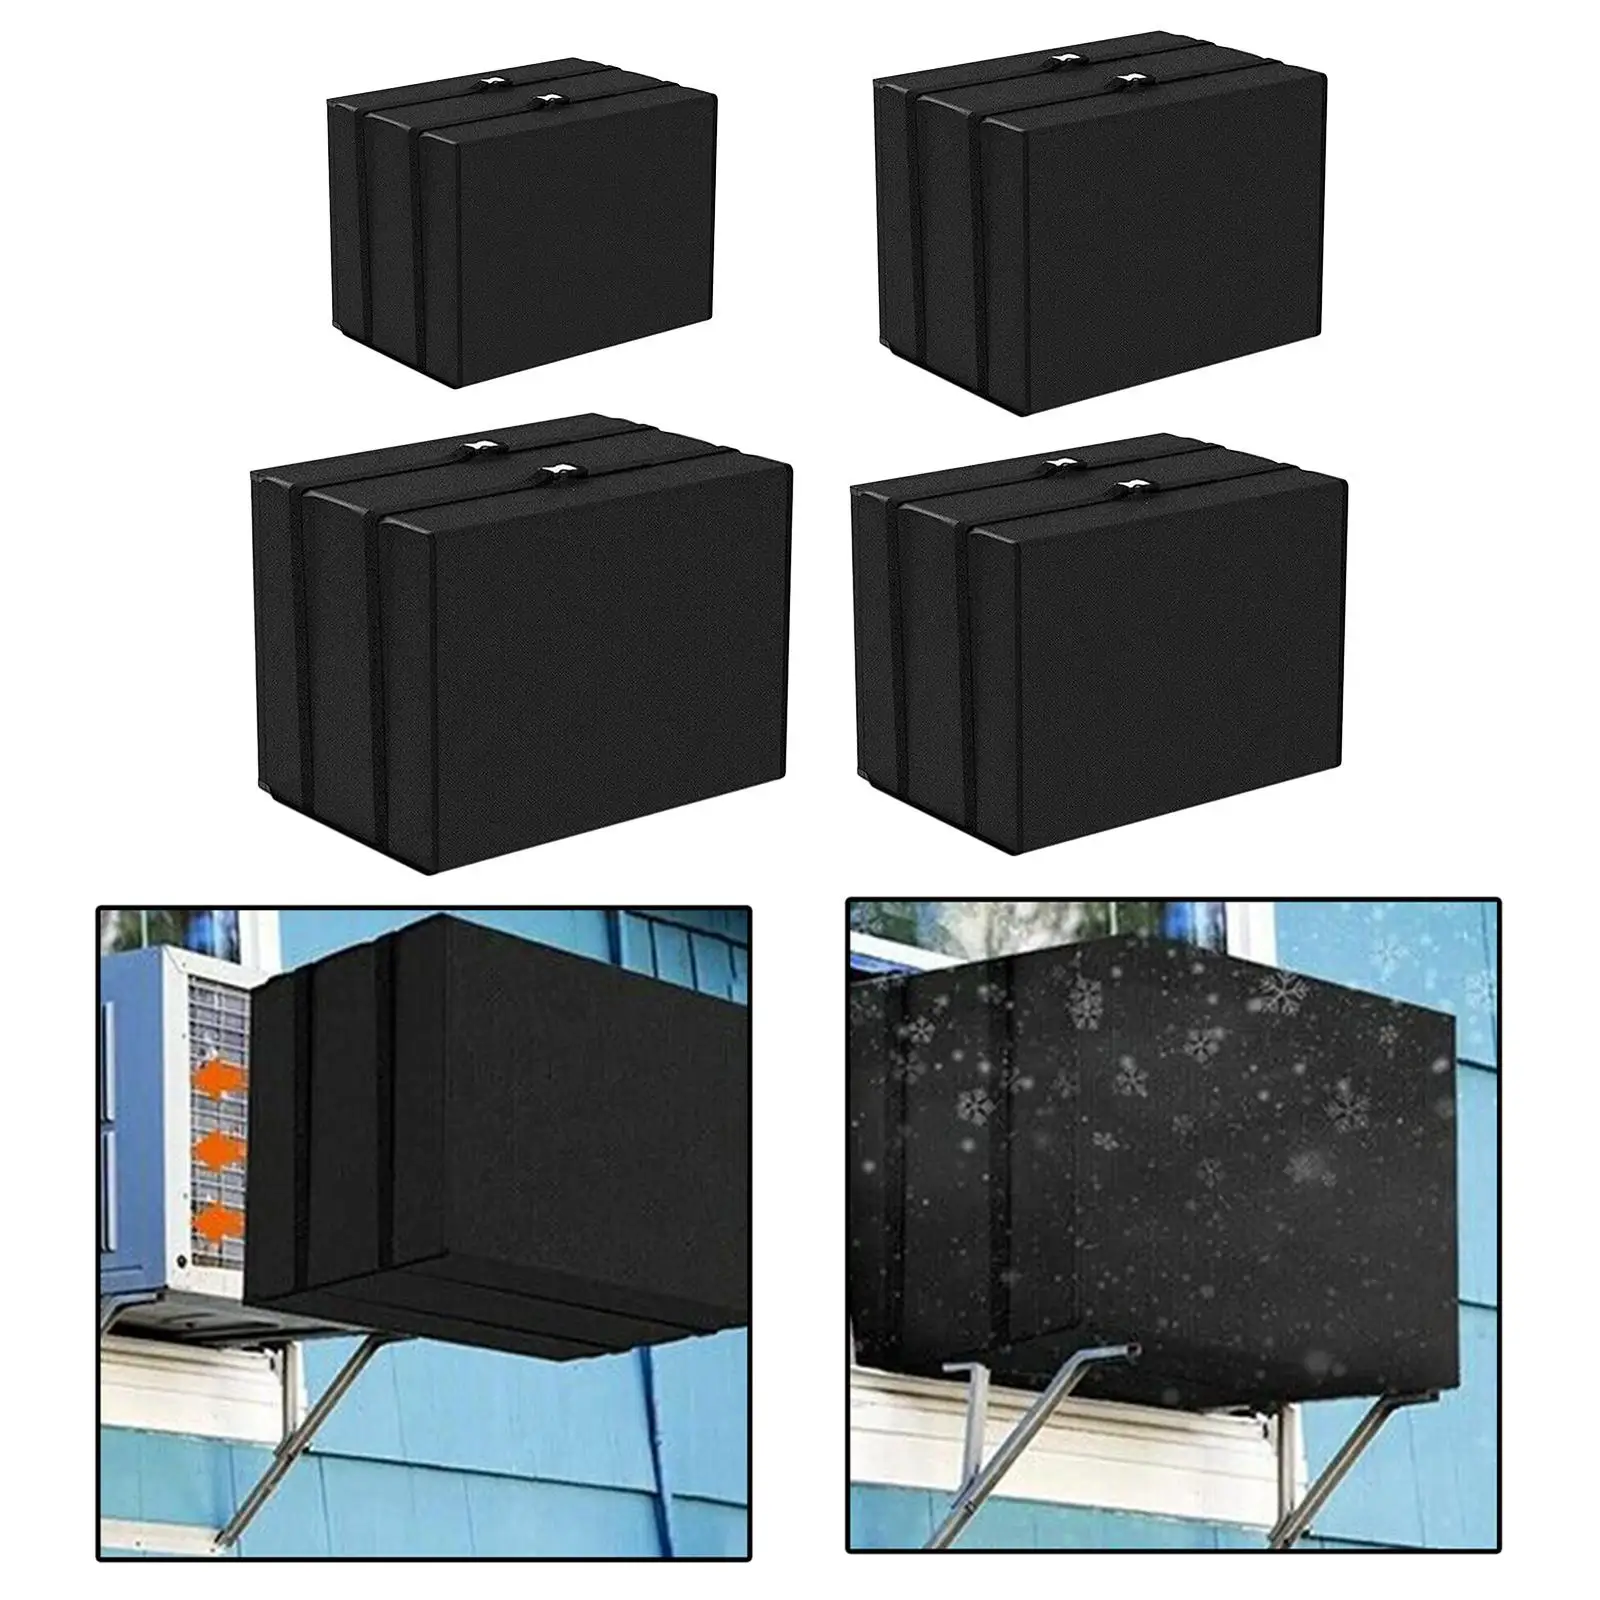 Window Air Conditioner Protective Cover Water-resistant Anti-UV Dust Covers with Buckle for Outdoor Unit